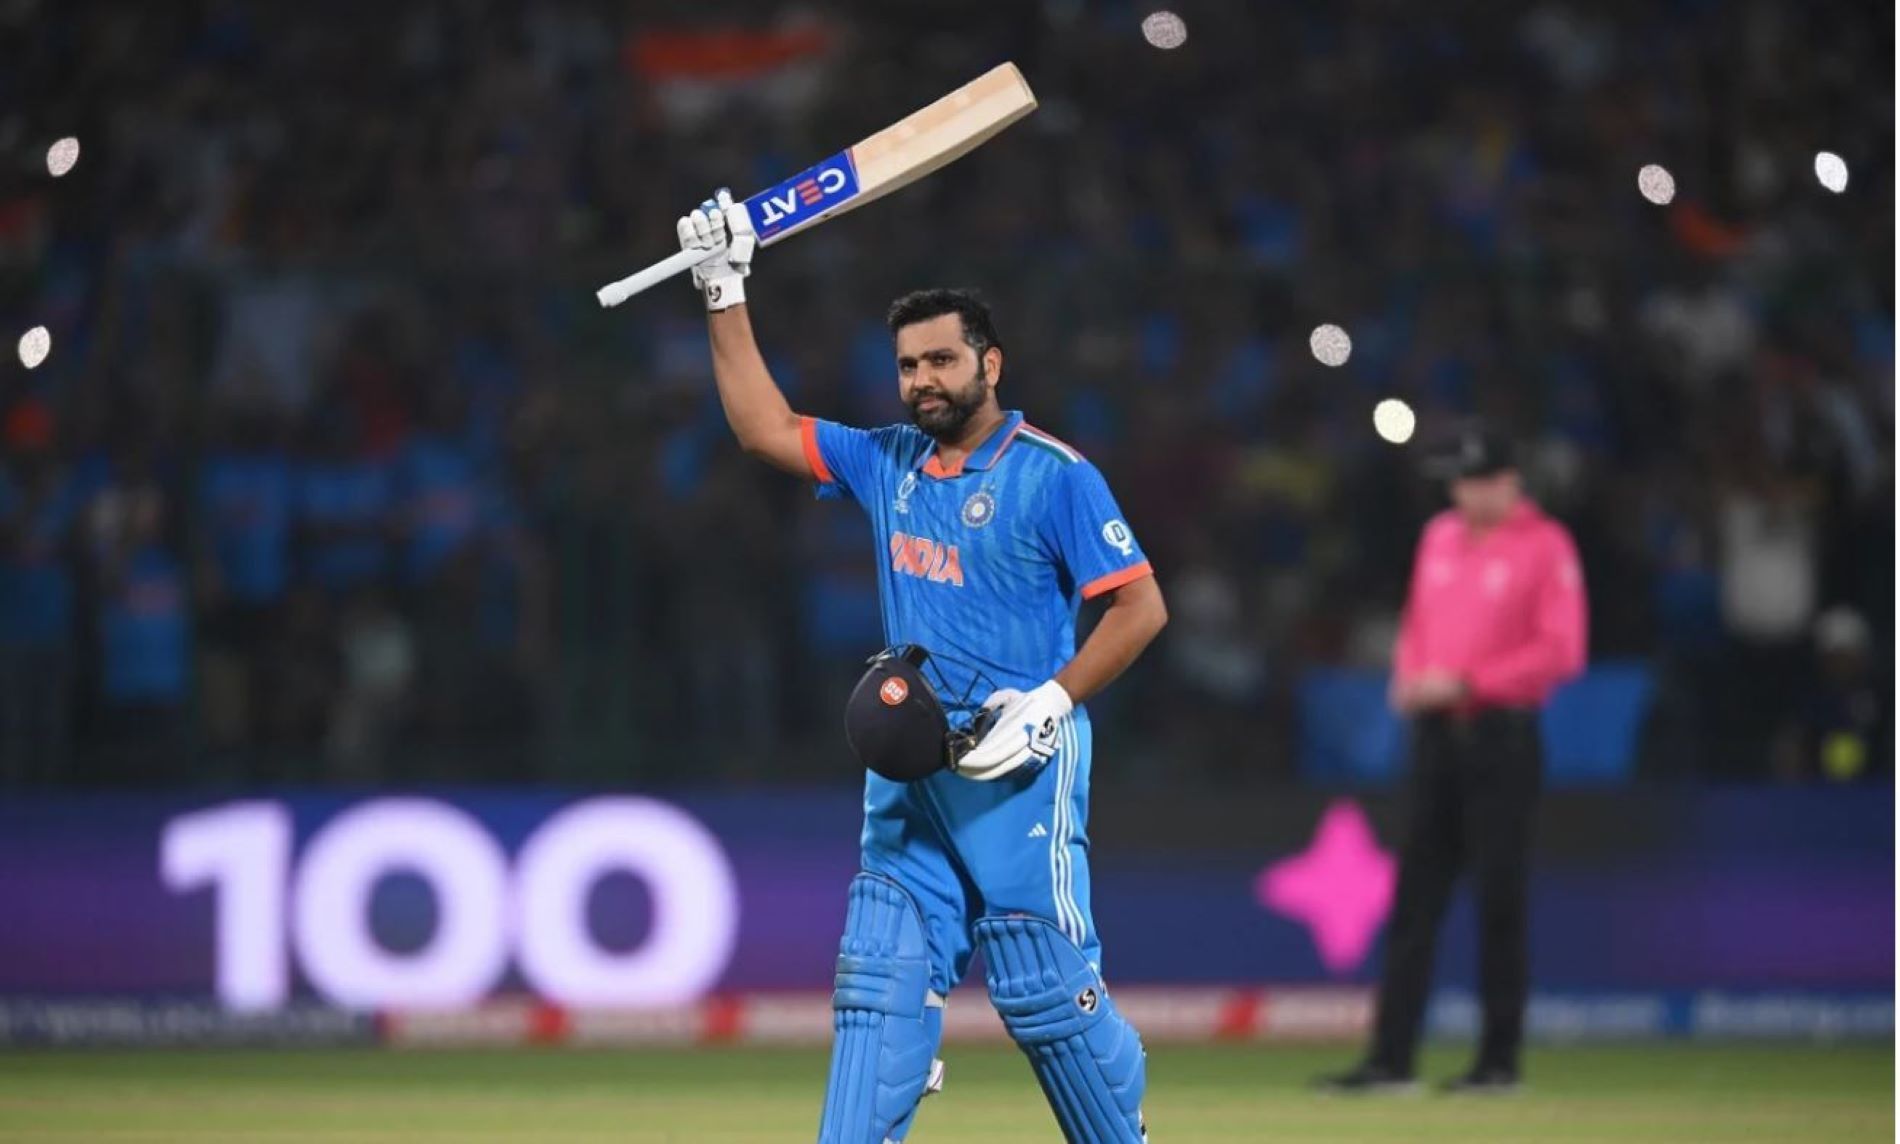 Rohit Sharma thrilled the Delhi crowd to bits with his sparkling strokeplay